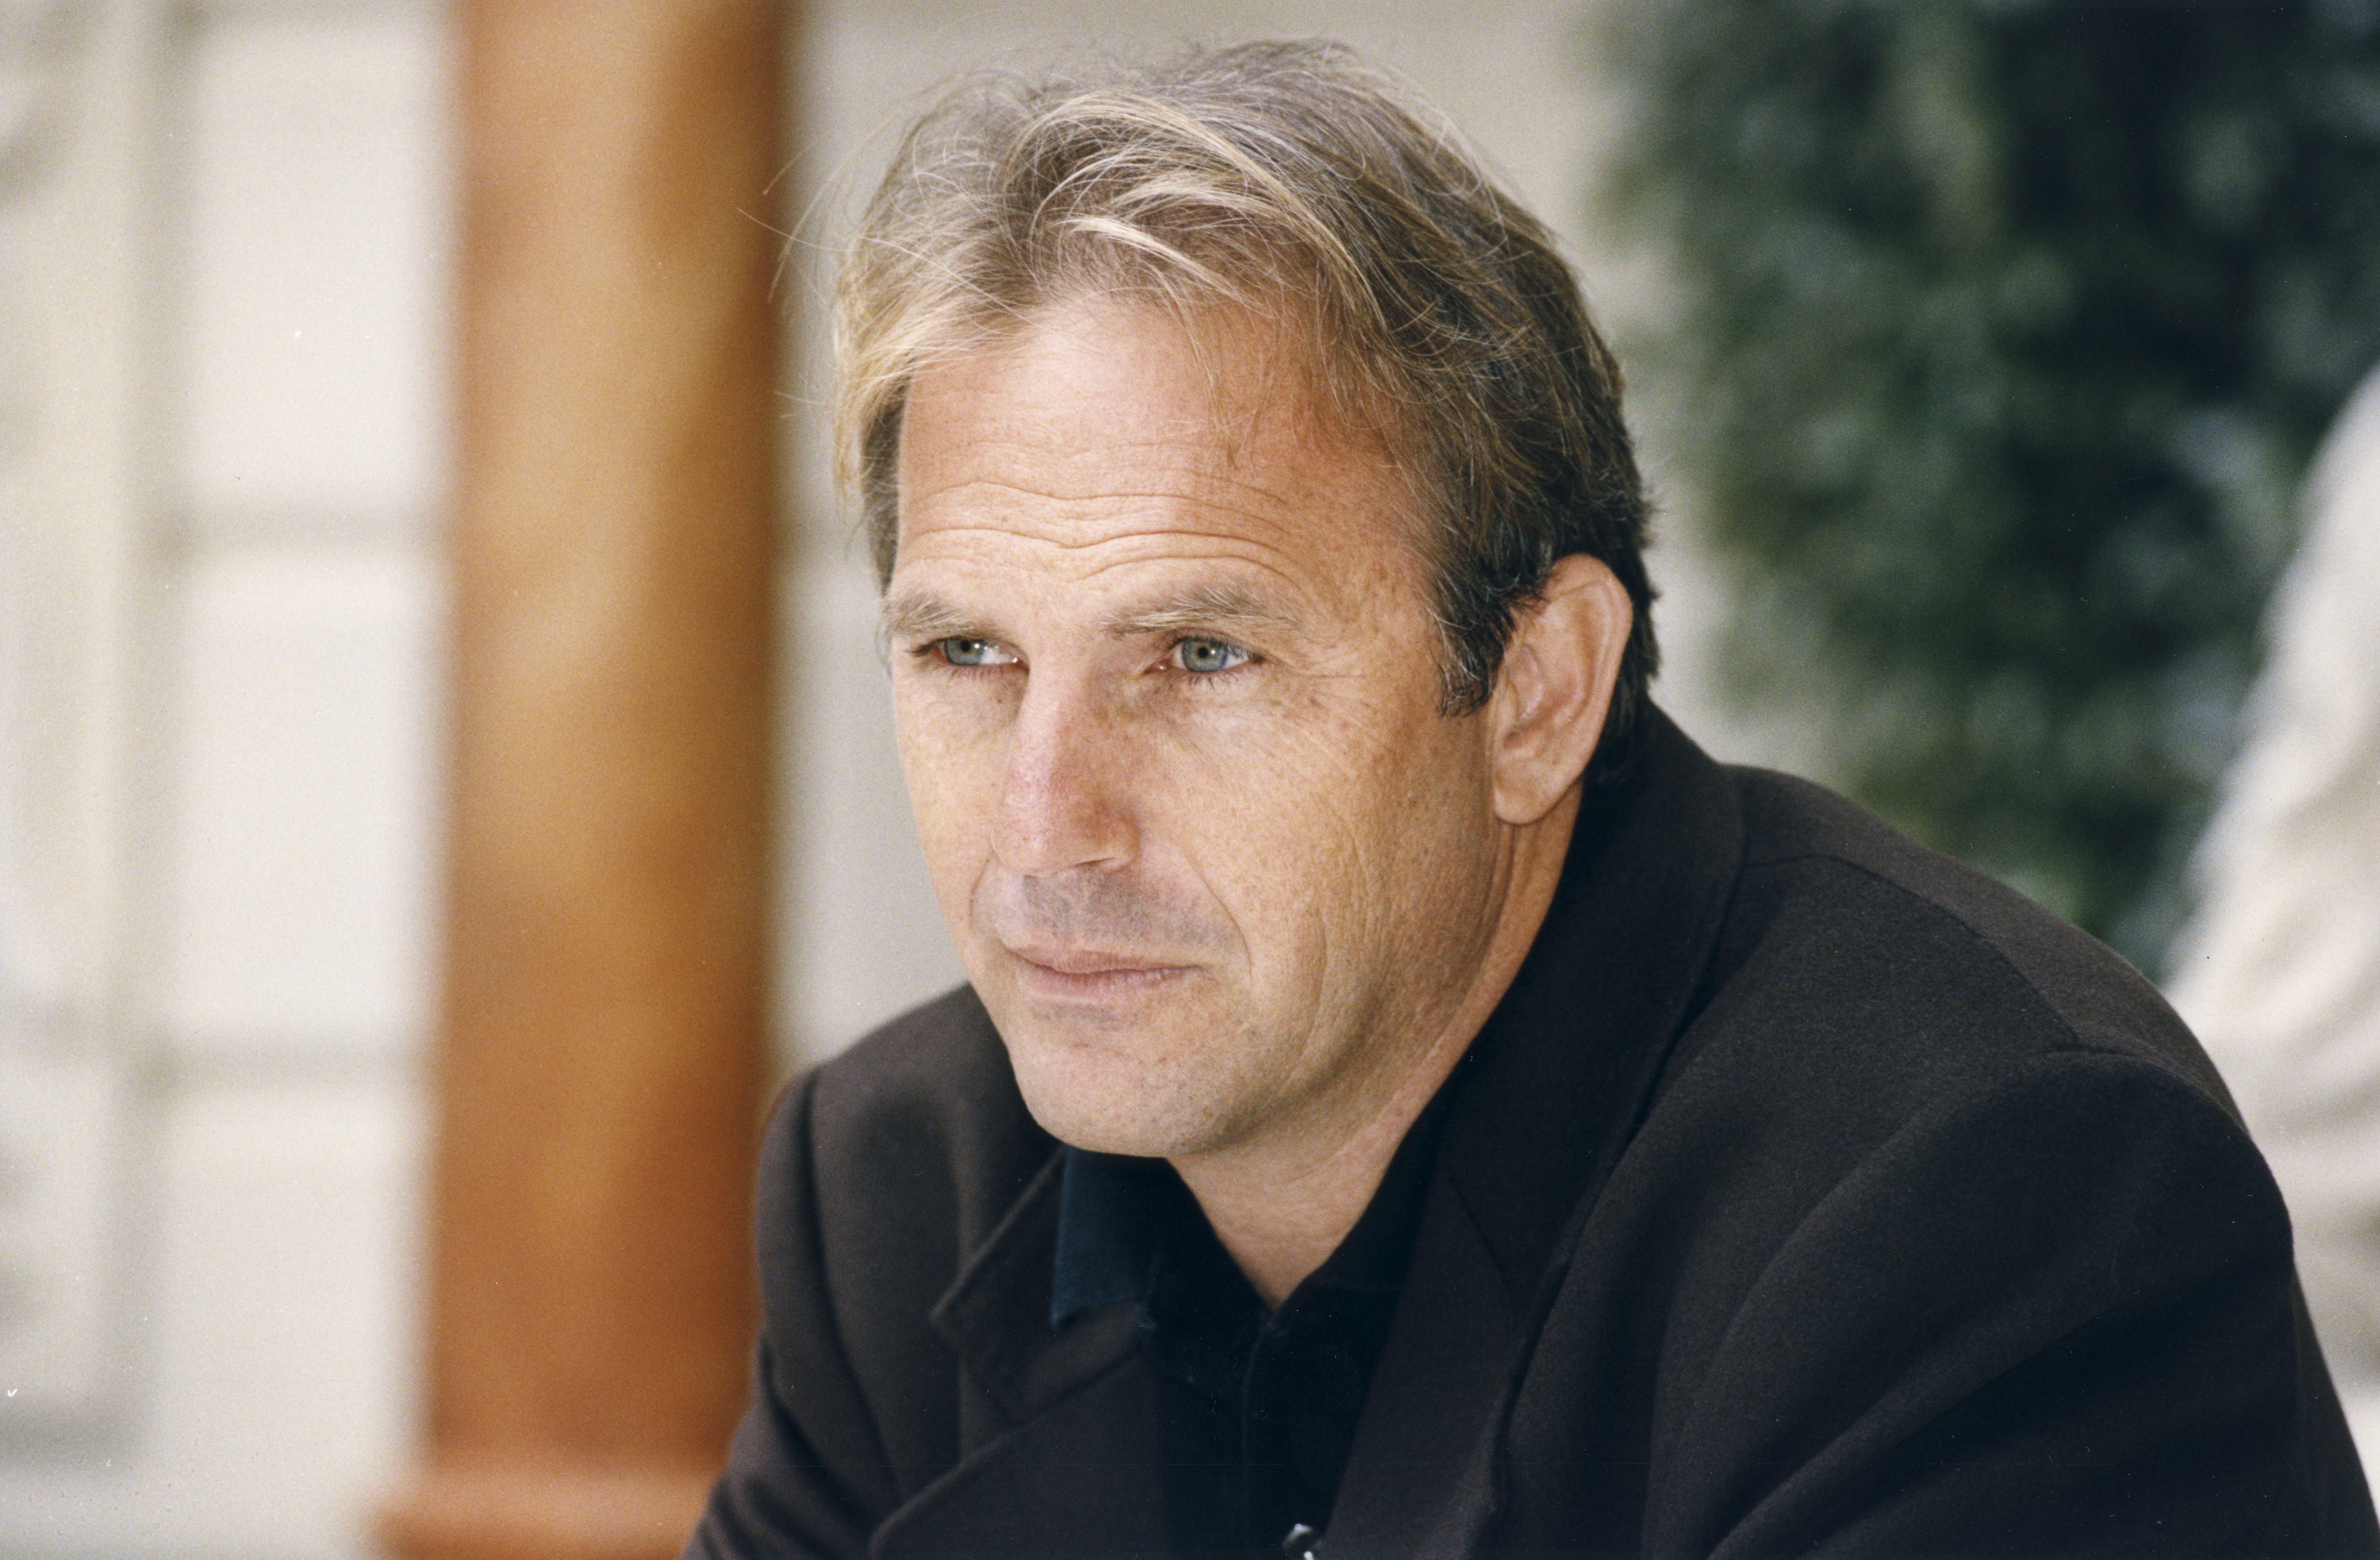 Kevin Costner posing for a promotional photo for the film "The Postman" in Paris, France, on February 16, 1998 | Source: Getty Images